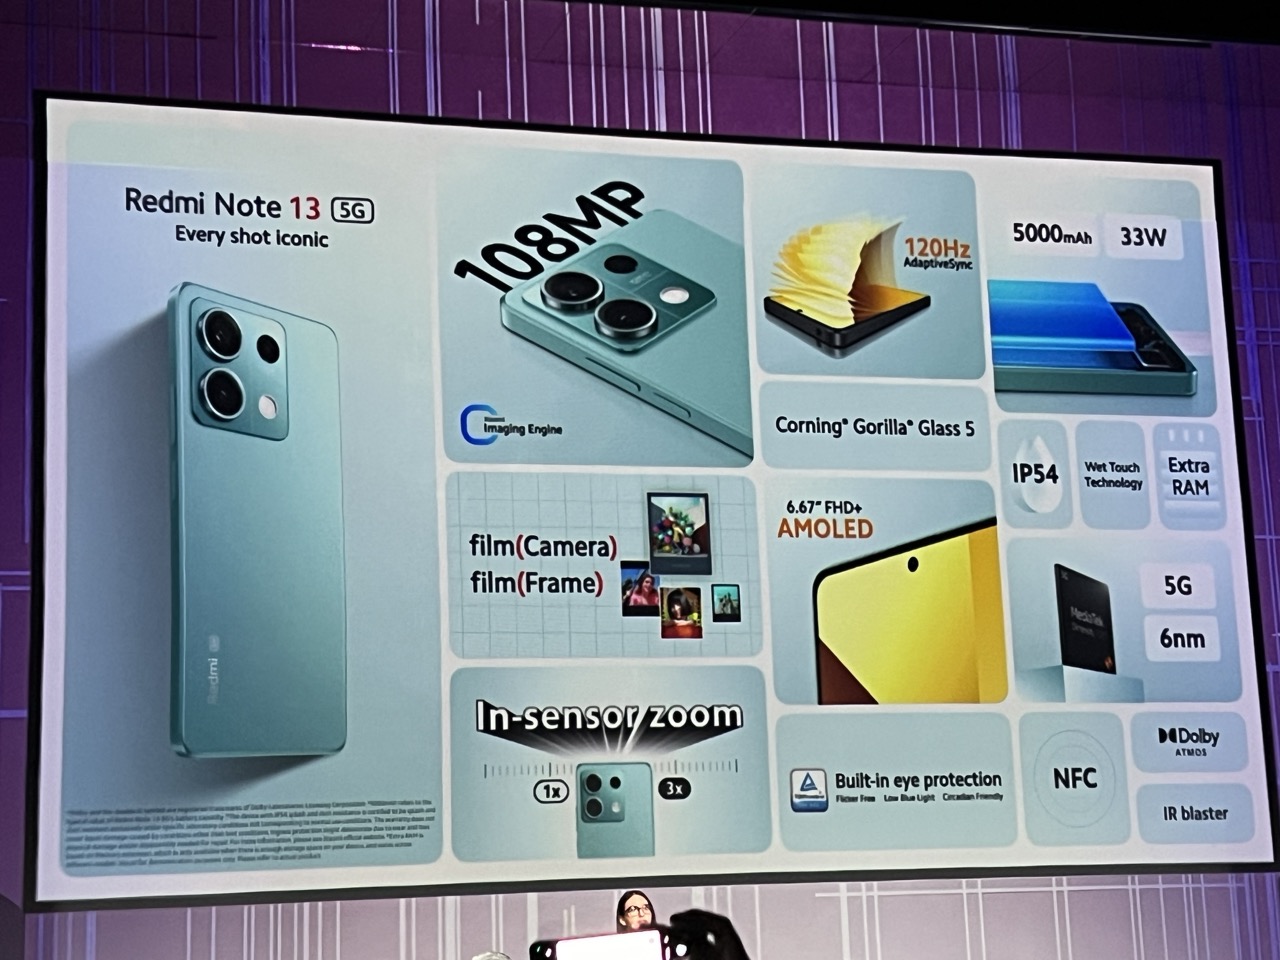 Redmi Note 14 5G with specs such like 108MP Camera, 120Hz screen, Dimensity SoC and more. 